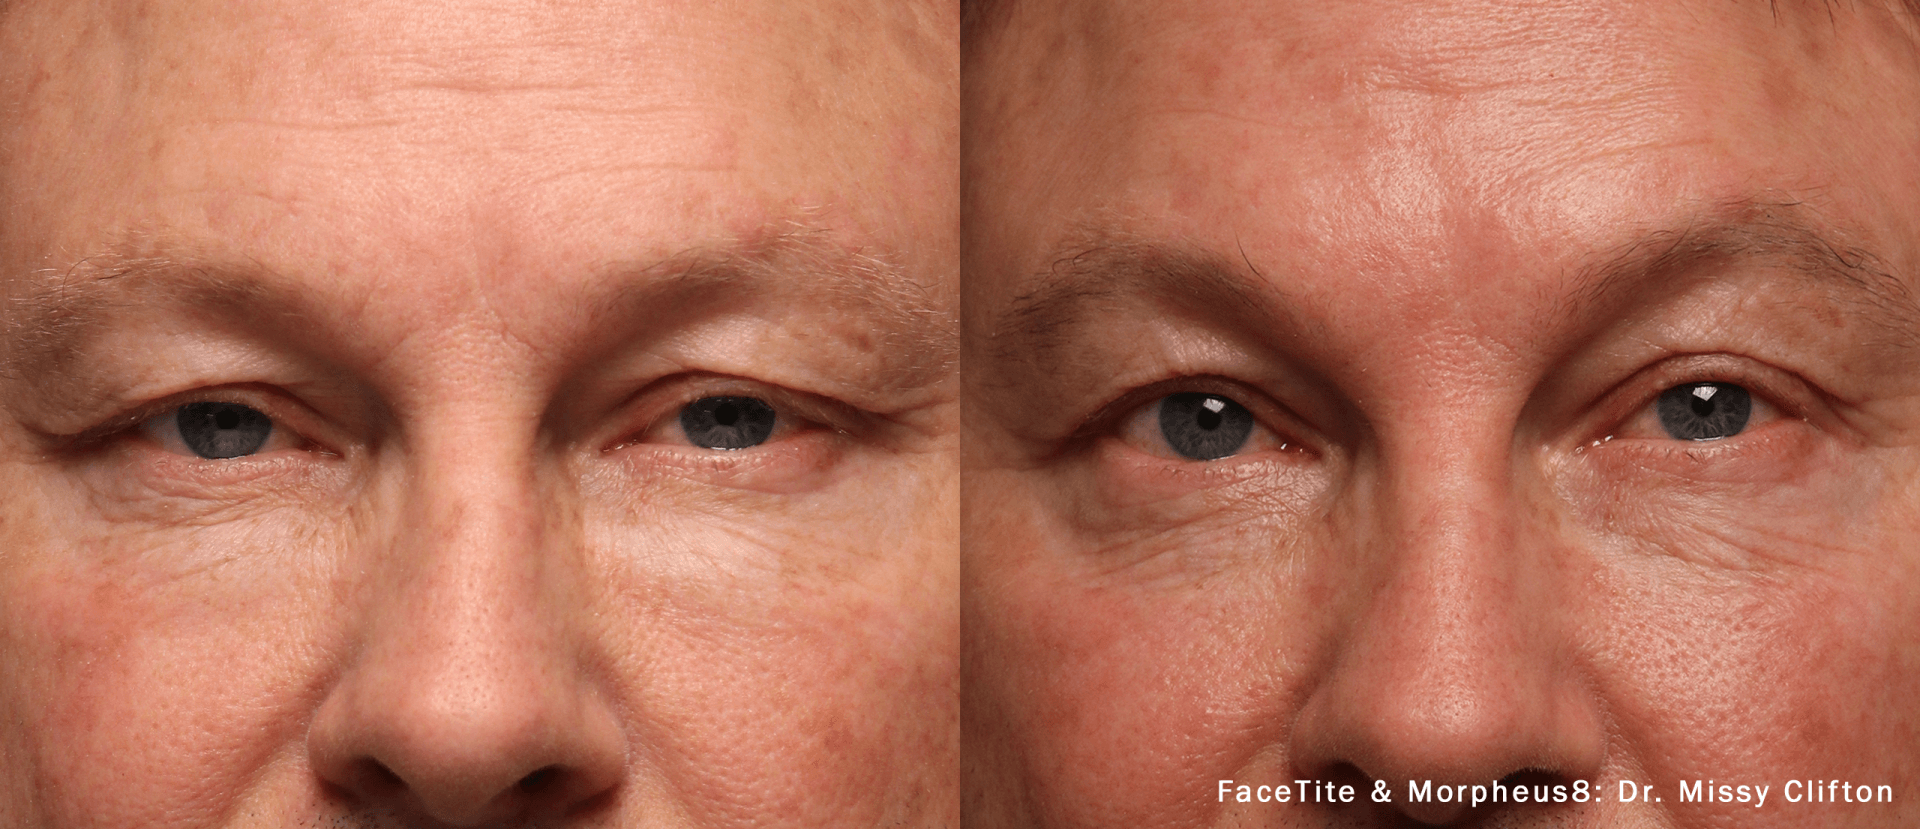 closeup of patient's face before and after Morpheus8 treatment